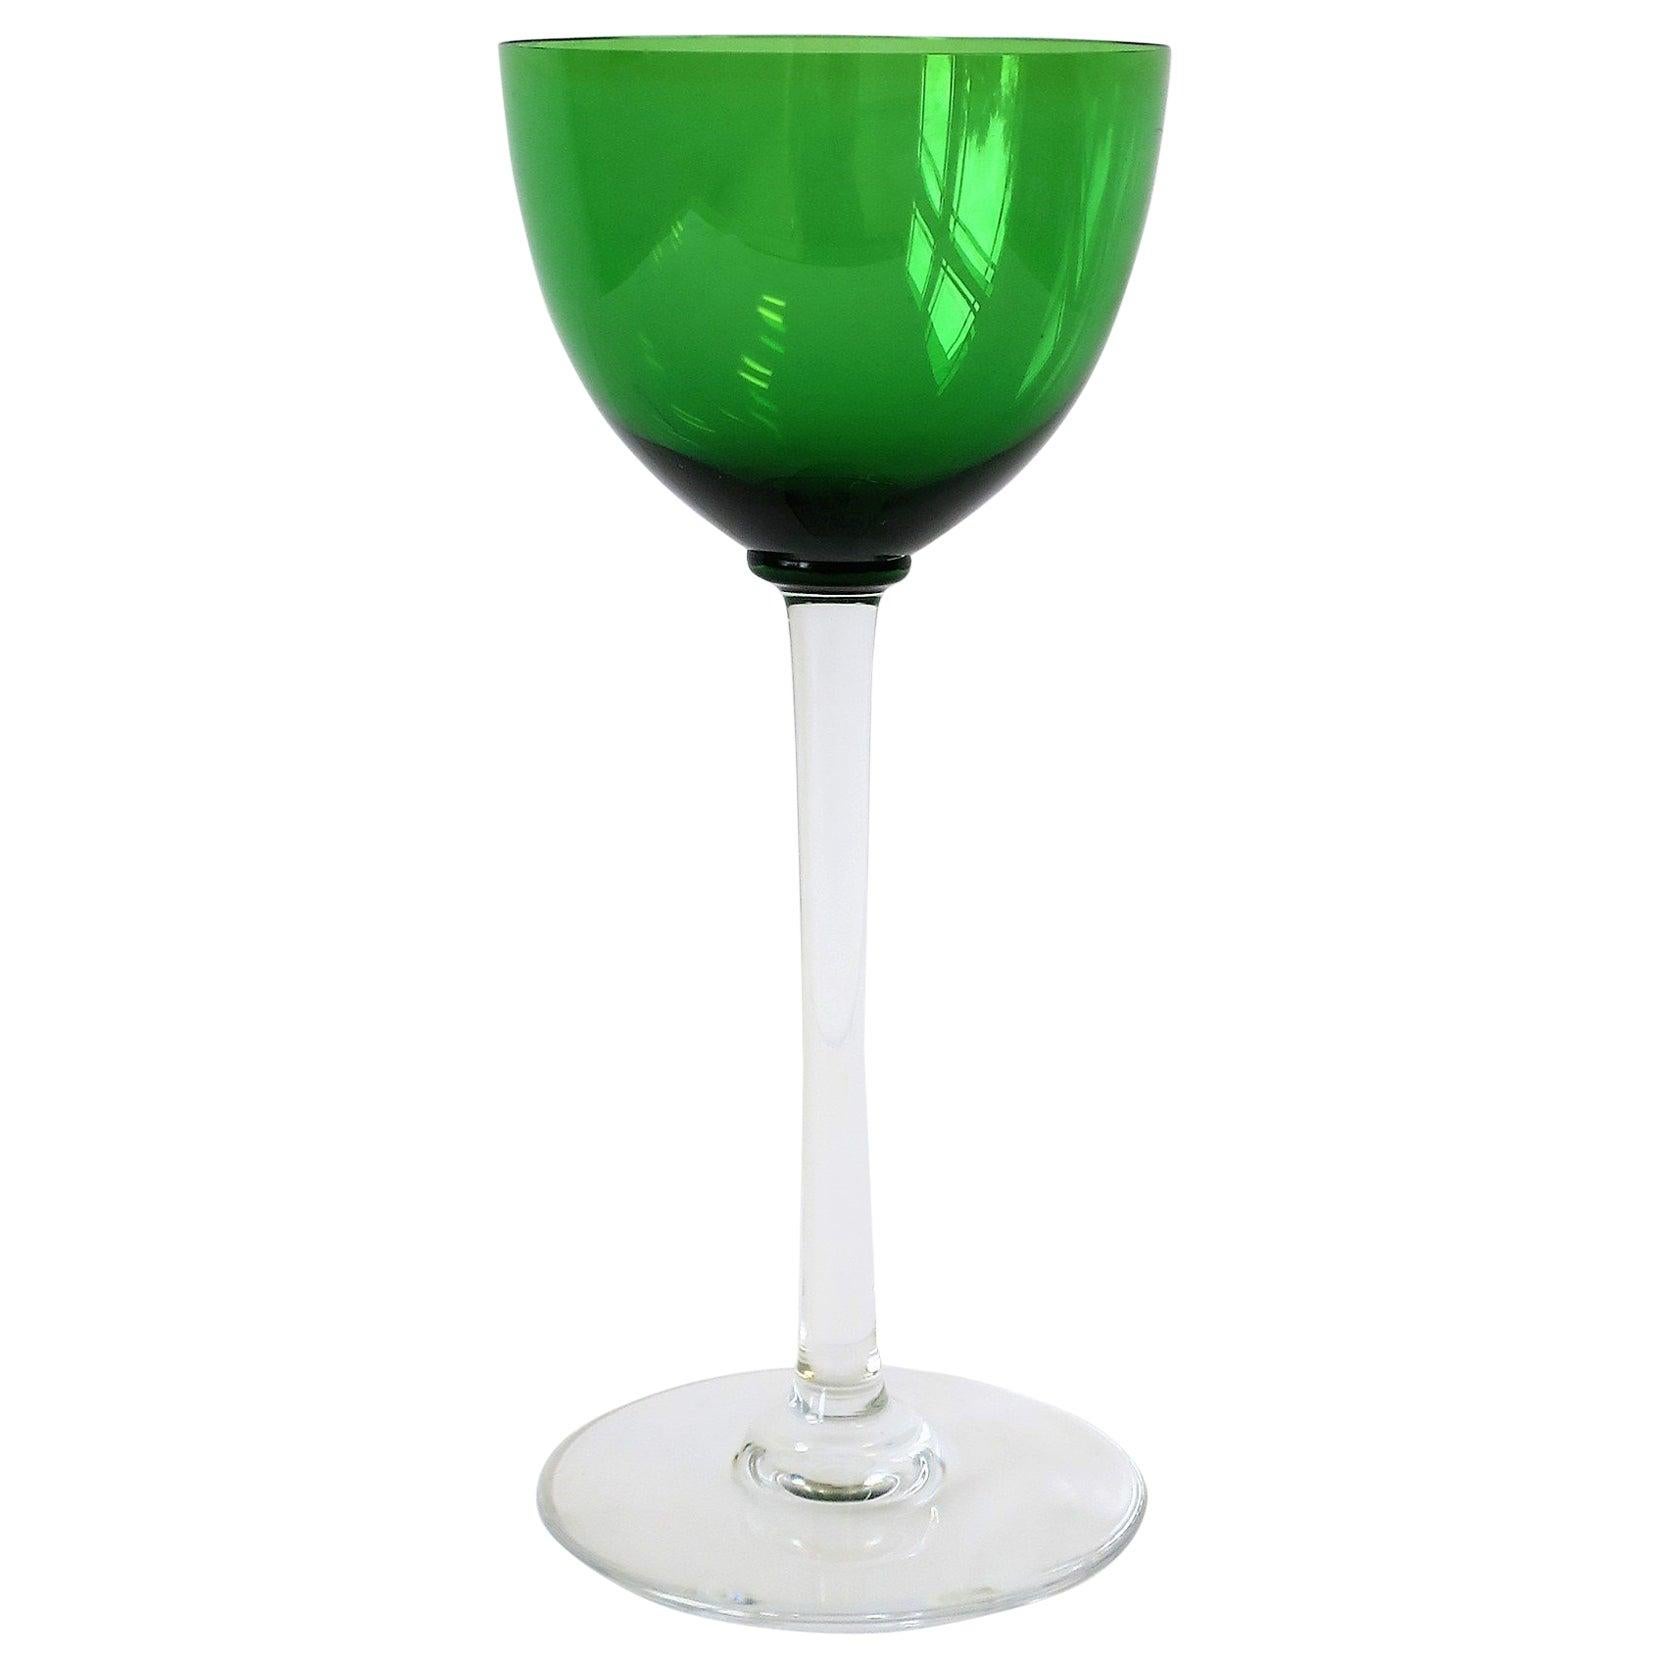 Including:

Baccarat French Crystal Wine Glass, 7.5 x 3.25, f_11880241, Sale Price: $148

Pink Blue Green Bohemian Crystal Shot Glasses after Baccarat, Set of 6, 3.5 x 9.75 x 2, f_10119813, List Price: $975

French Saint-Louis Crystal Cobalt Blue